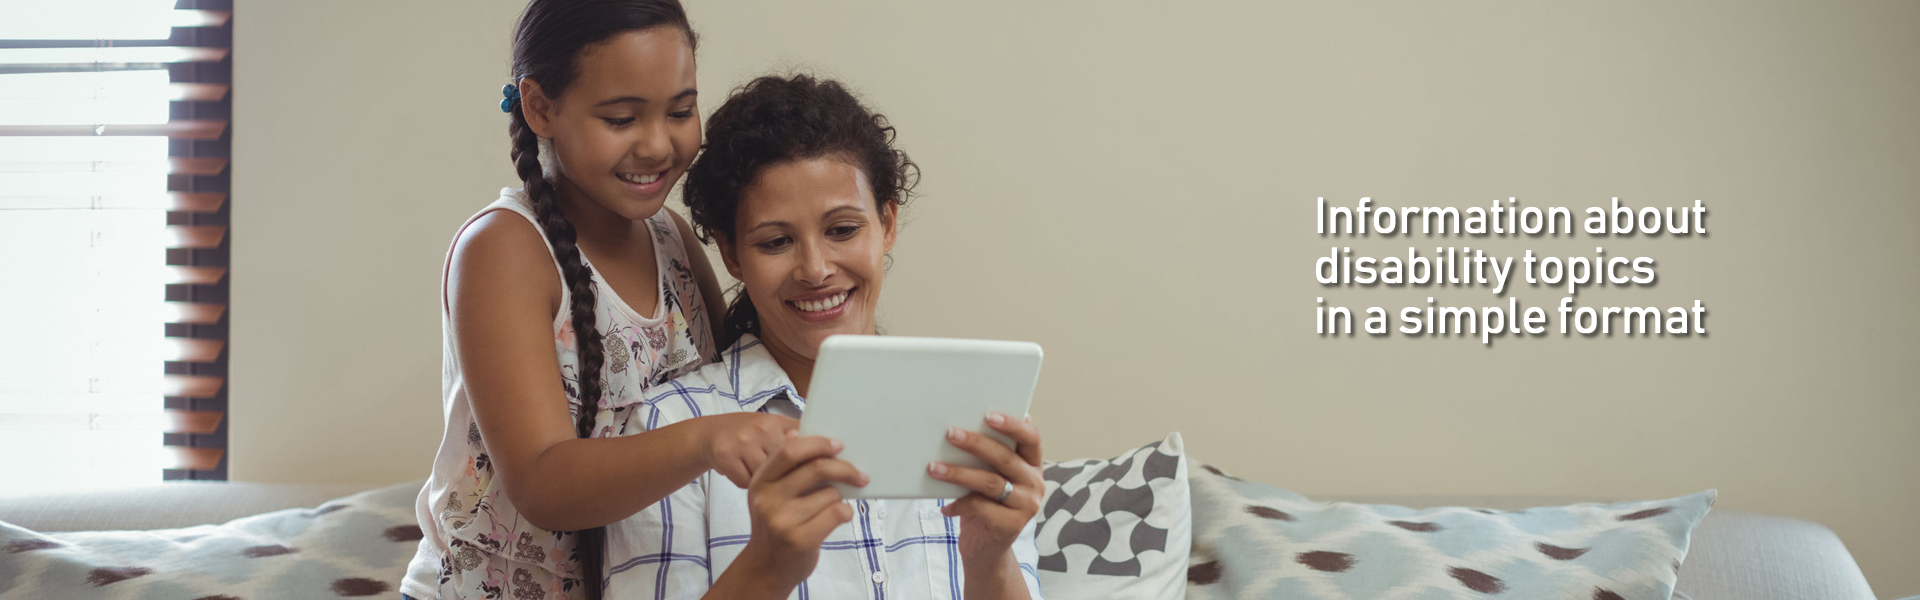 Indoors. On a sofa, a  mother and her daughter smile. The mother holds a tablet at chest height. The daughter is kneeling behind the mother's right shoulder and touches the screen of the tablet. Text at right over the image: Information about disability topics in a simple format.